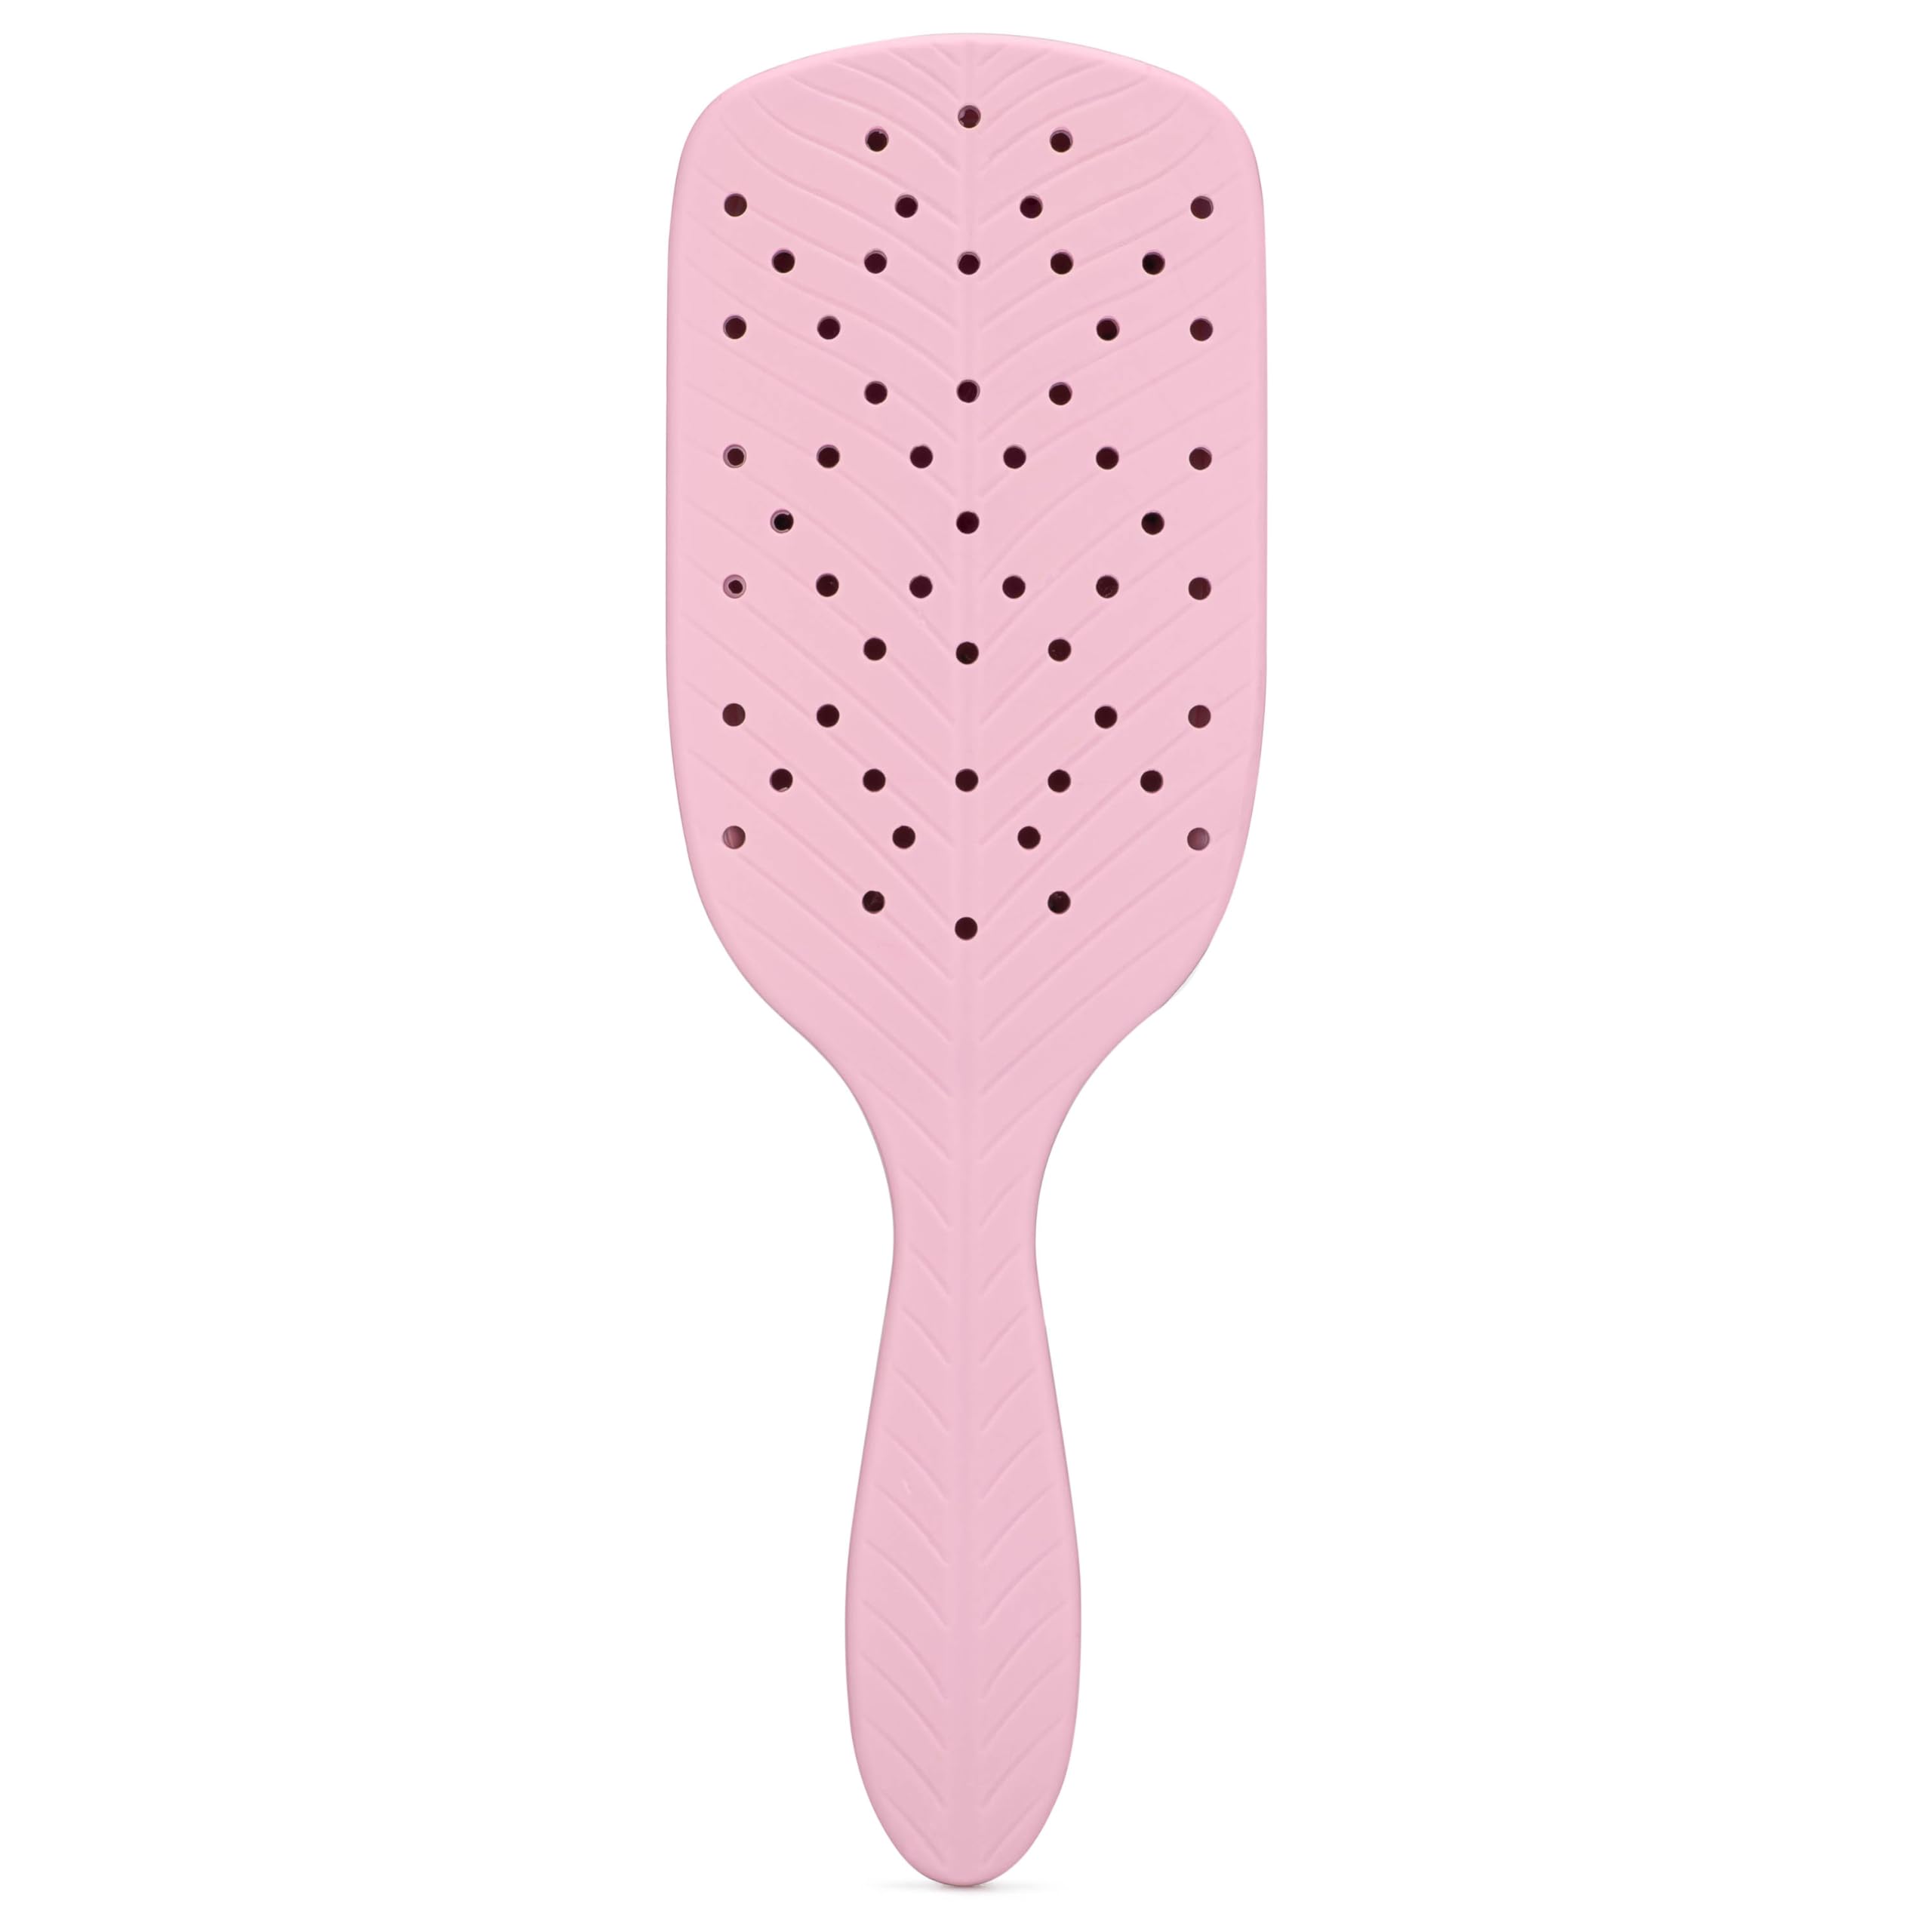 Wet Brush Go Green Thick Hair Paddle Detangling Brush, Pink - Ultra-Soft IntelliFlex Bristles With AquaVent - Gently Loosens Knots While Minimizing Pain - Curly, Coarse, Long, Wet & Dry Hair